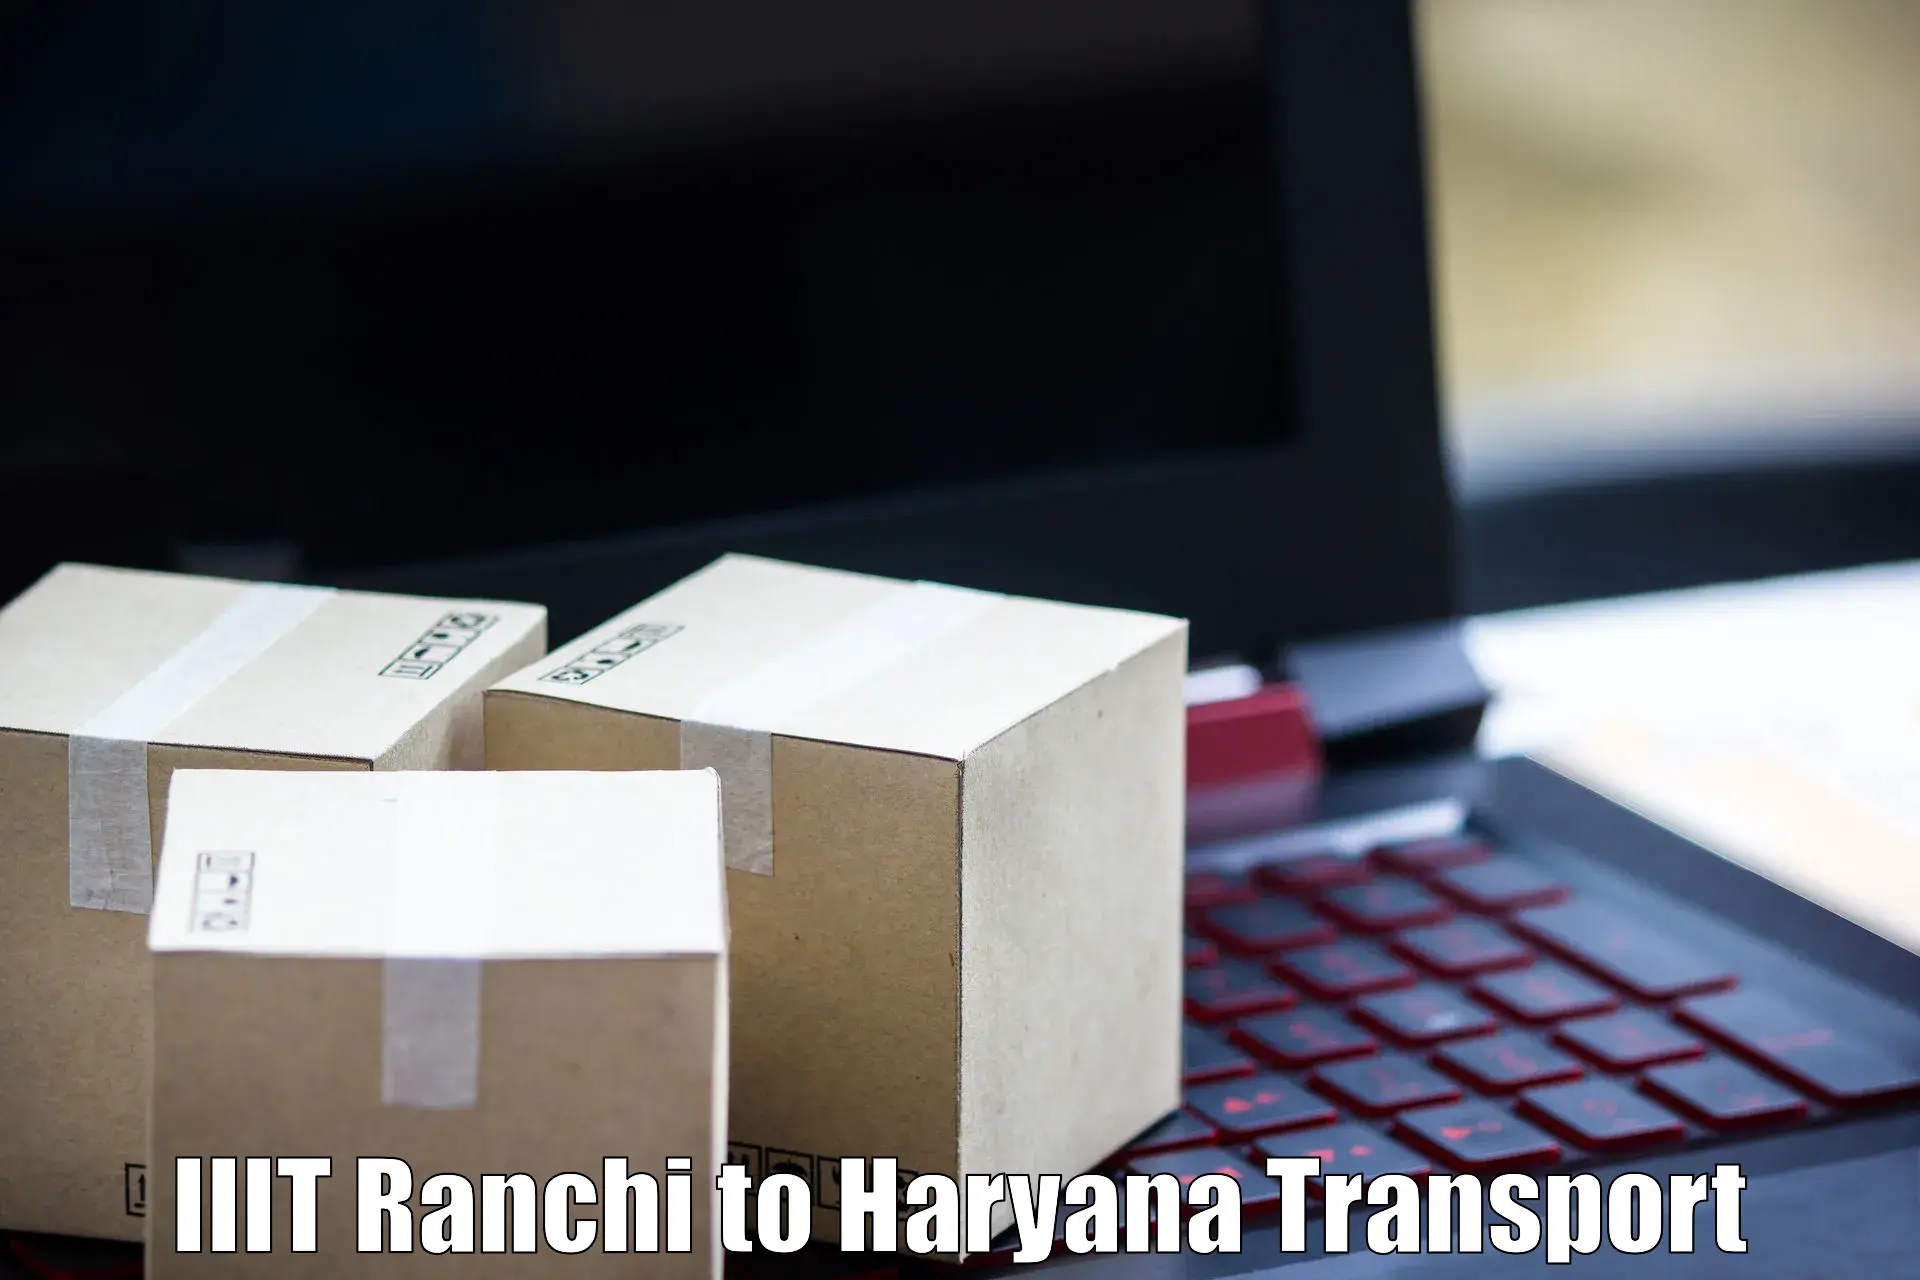 Air freight transport services in IIIT Ranchi to Hansi